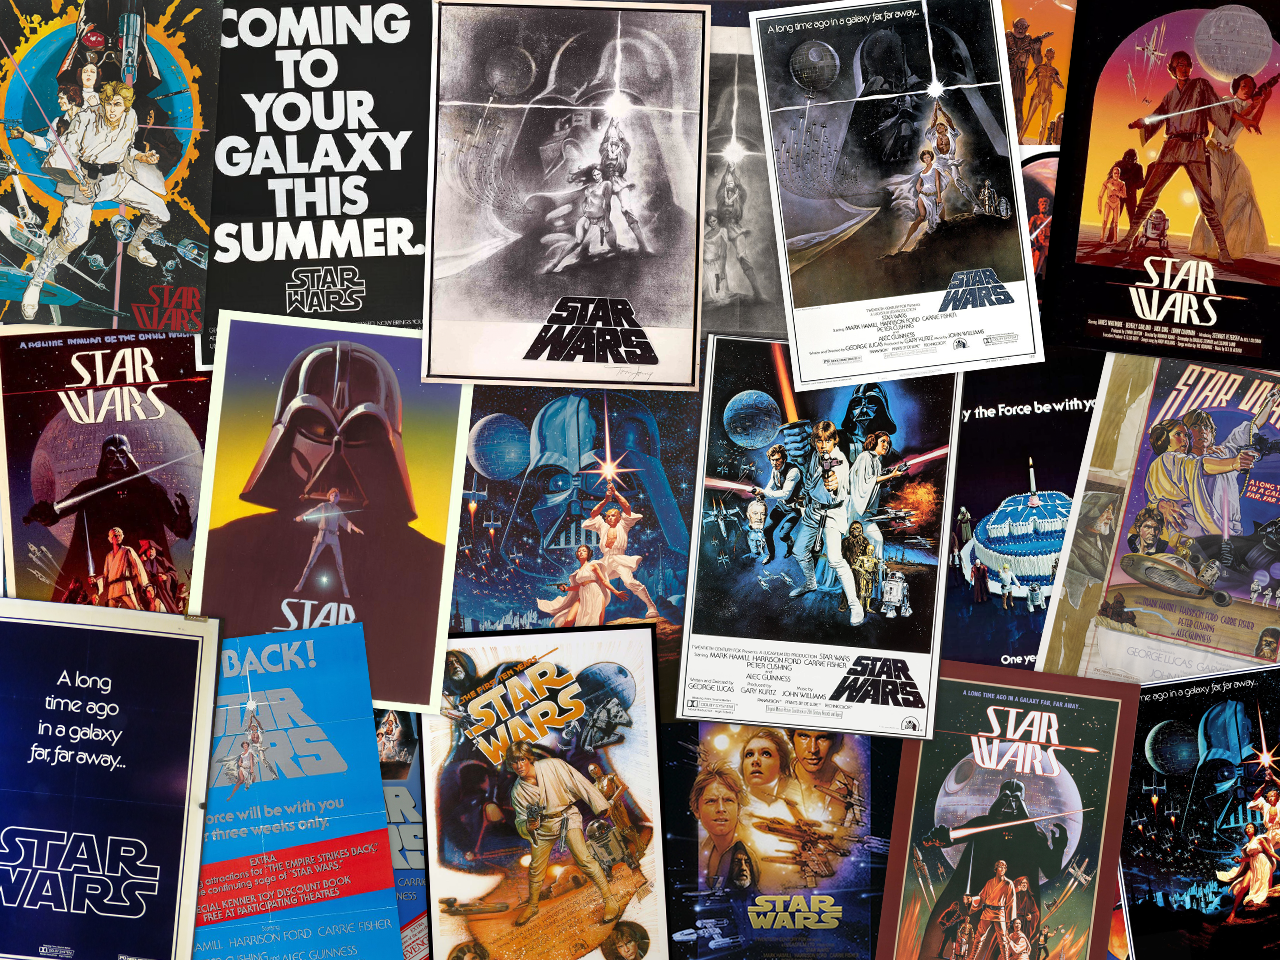 The History of Star Wars (1977) Posters